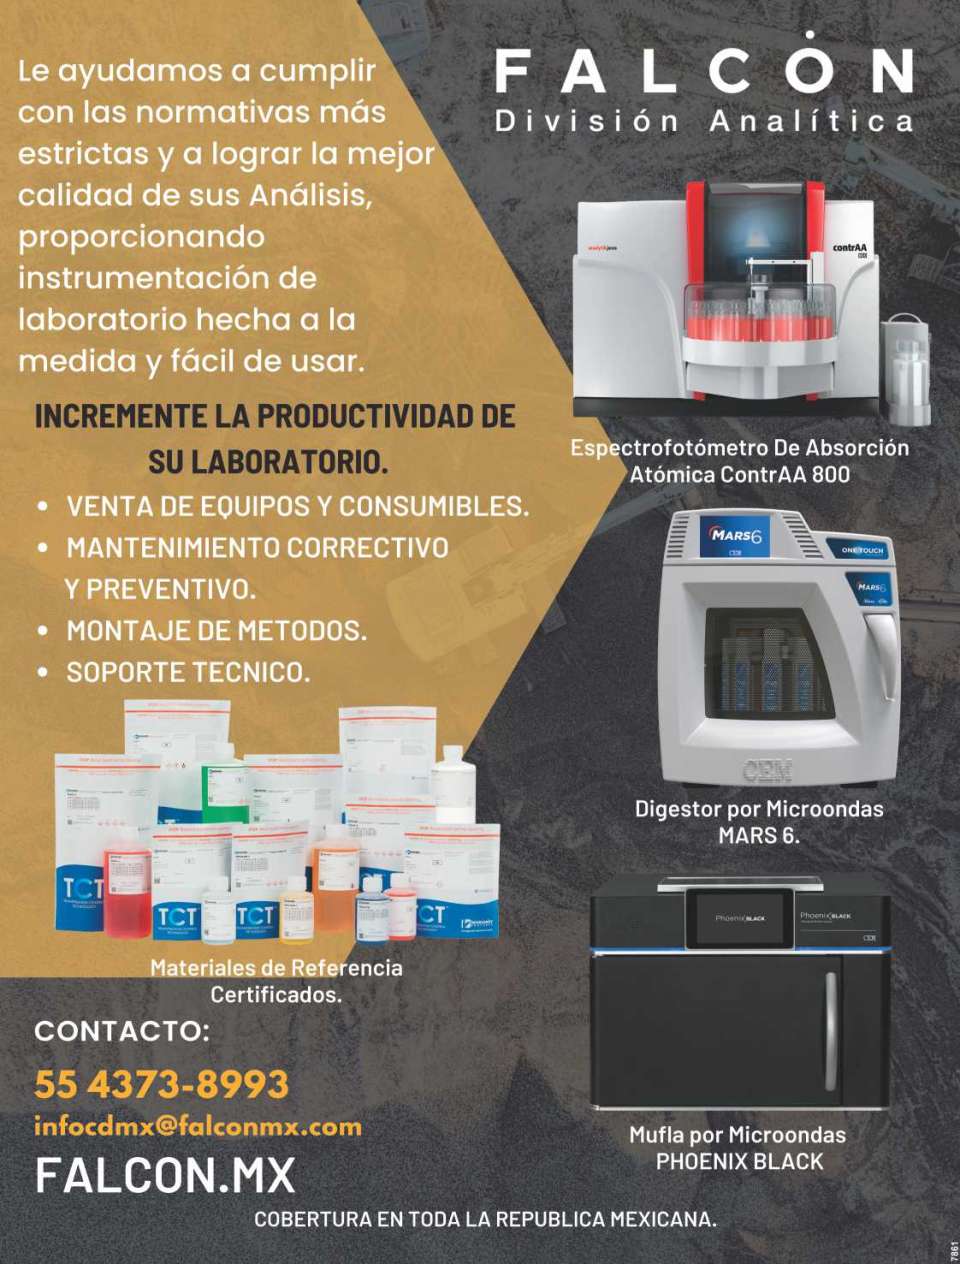 We help you to comply with the strictest regulations and to achieve the best quality of your Analysis, providing laboratory instrumentation made to measure and easy to use. *Equipment sale